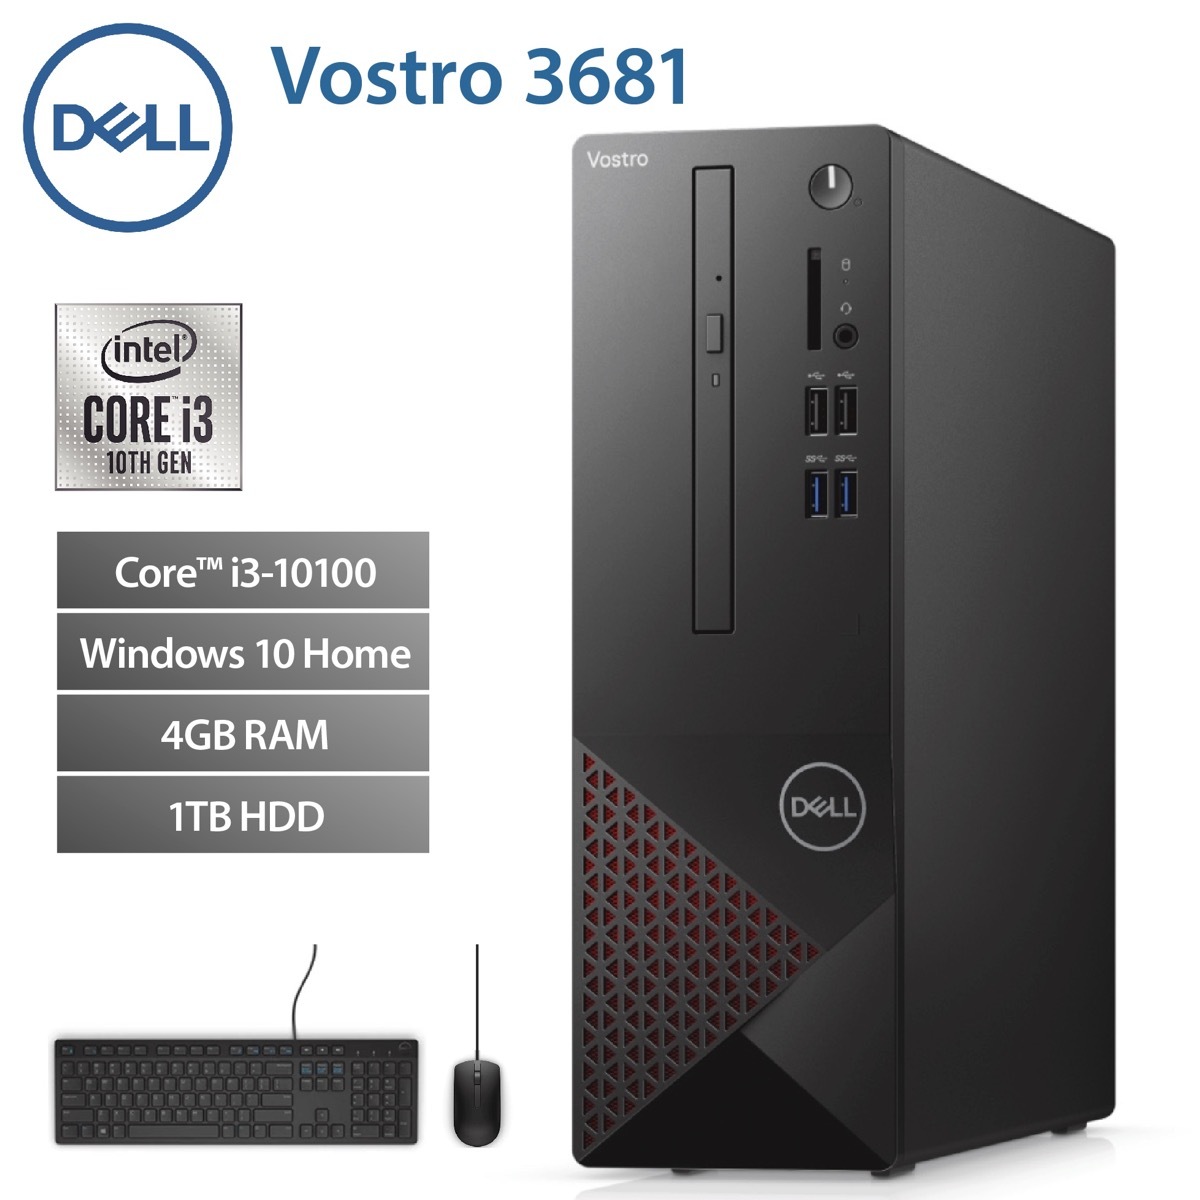 Dell Vostro3681 Win10 Intel Core I3 3 6ghz 物覚え4gb Hdd1tb バックグラウンド Pc マイクロコンピューター パウダーコンパクト 墨染め デル 10 Cannes Encheres Com